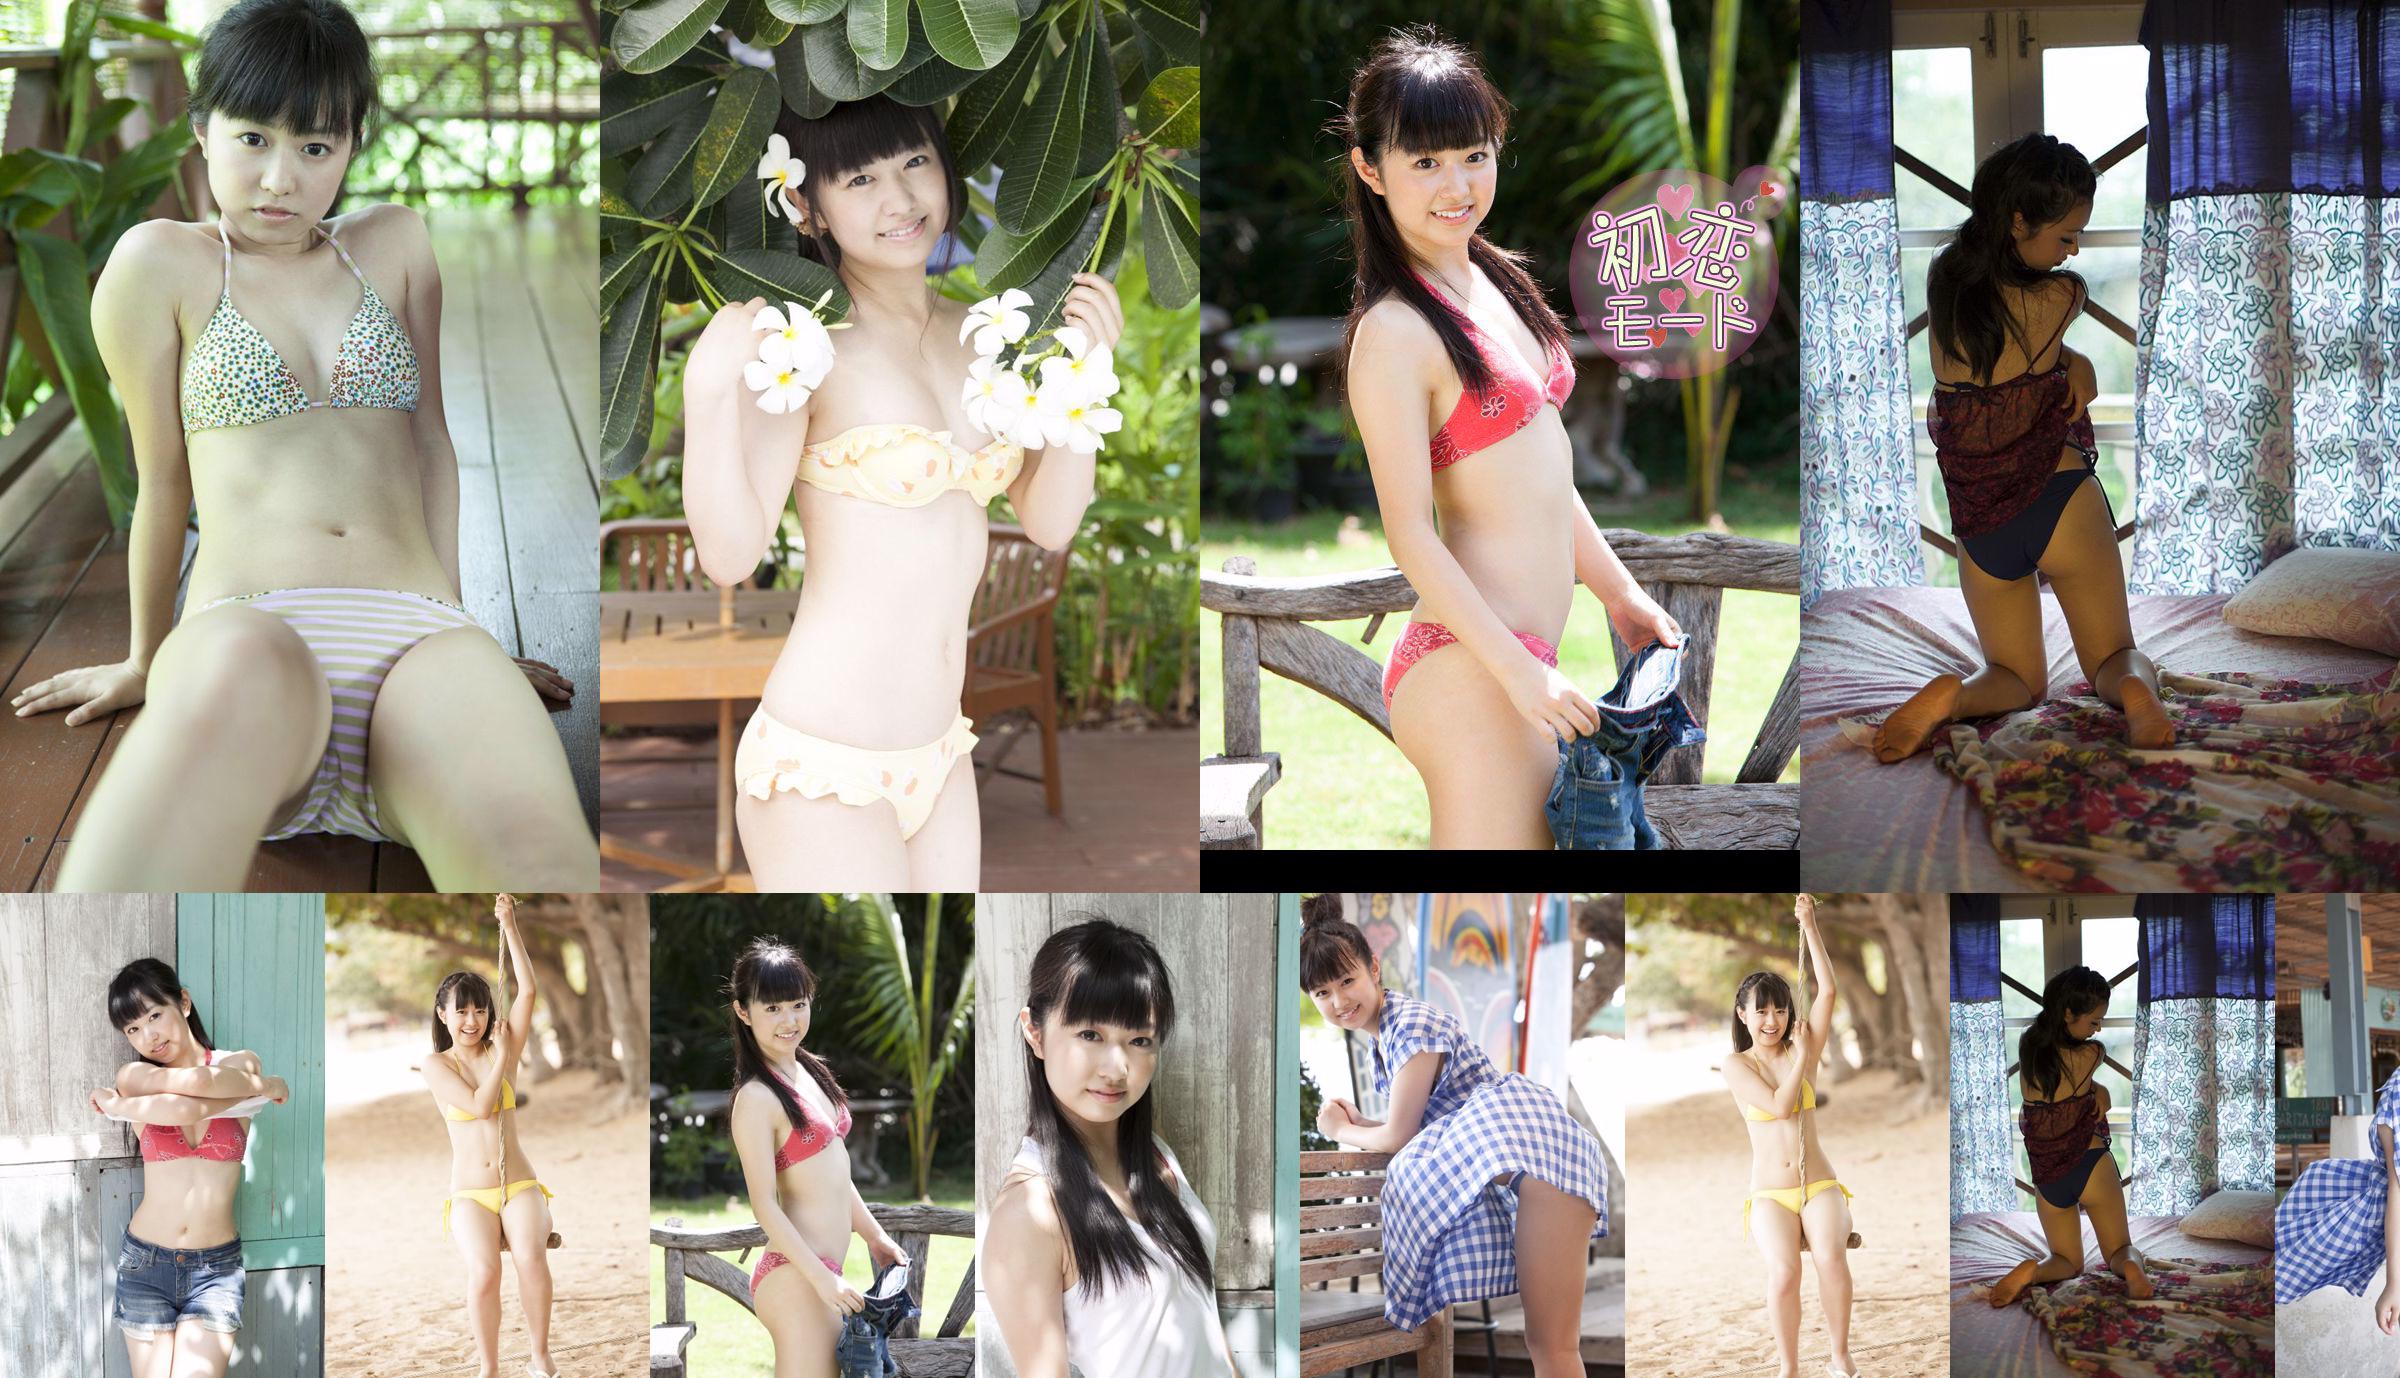 Ikura Aimi "First Love Mode" Part 1 [Image.tv] No.aeca66 Page 1